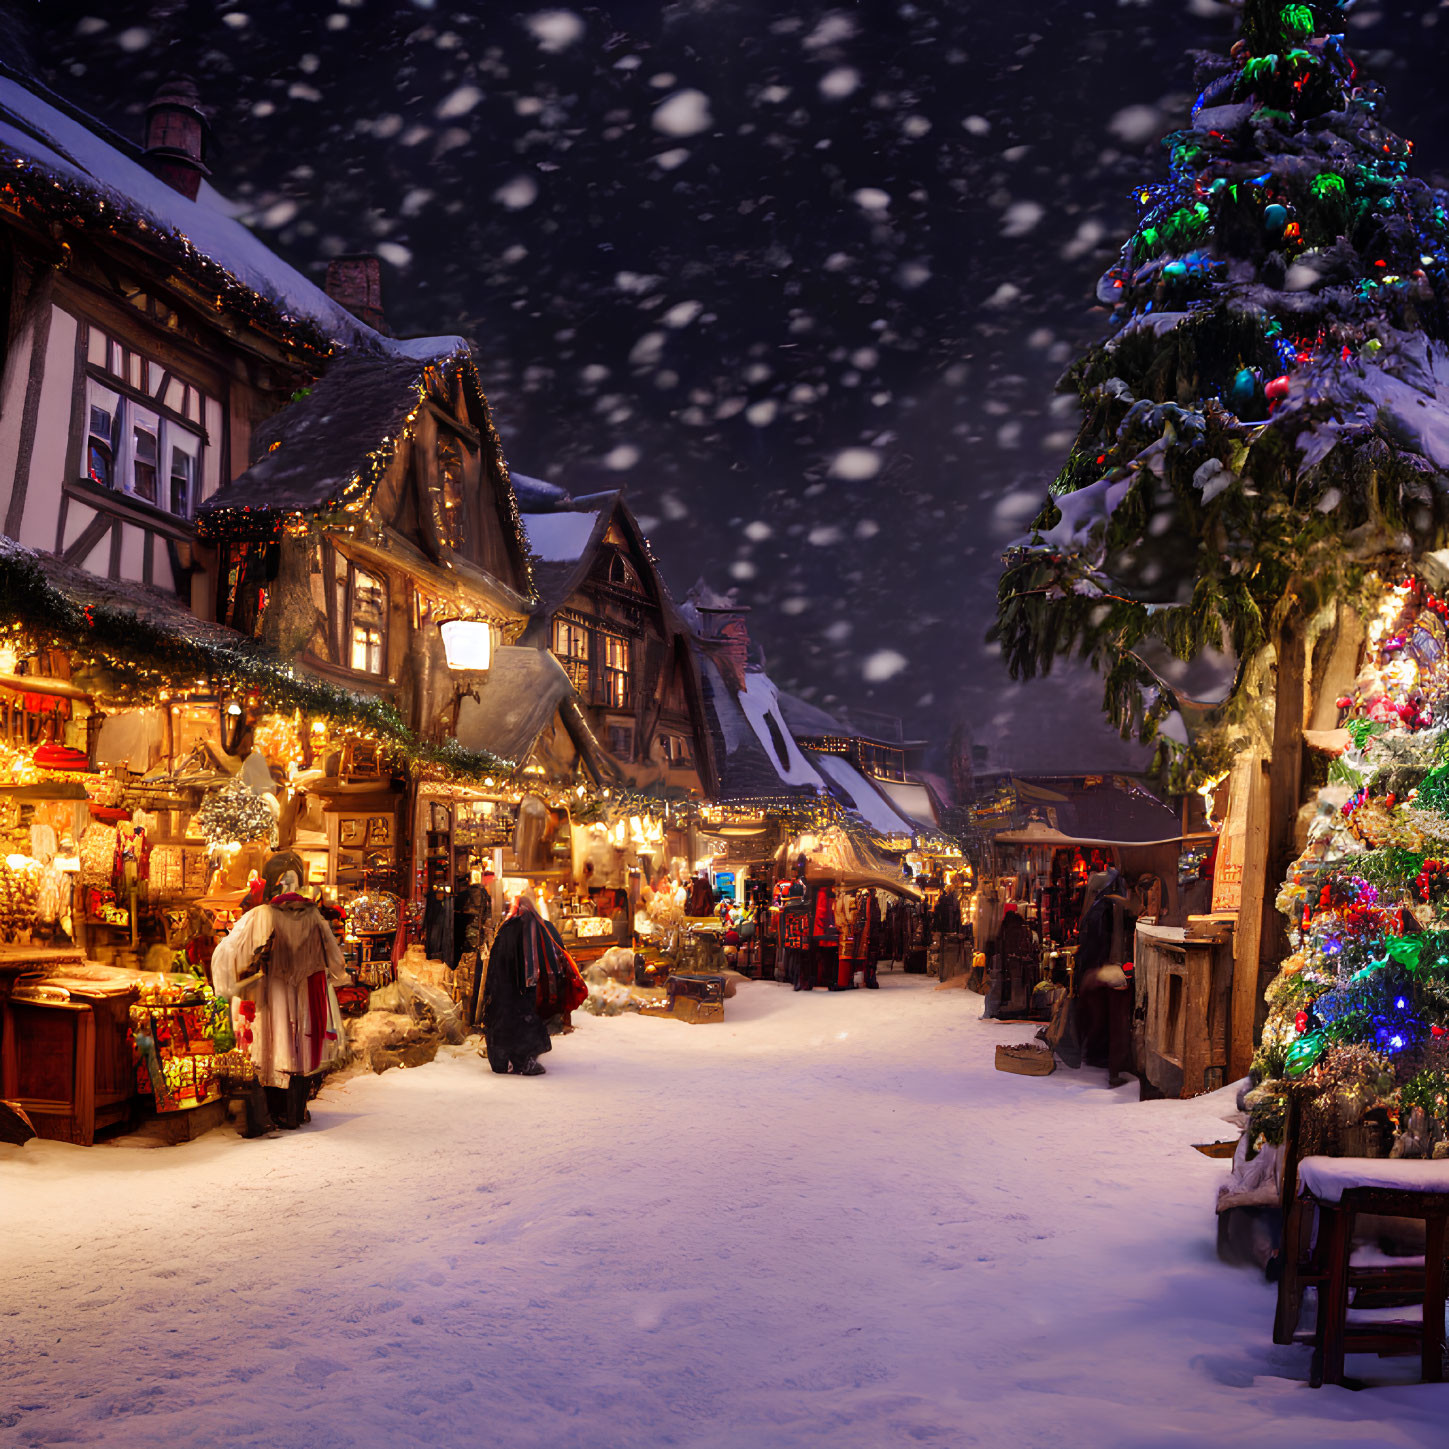 Charming Christmas Market at Night with Snow and Lit Tree